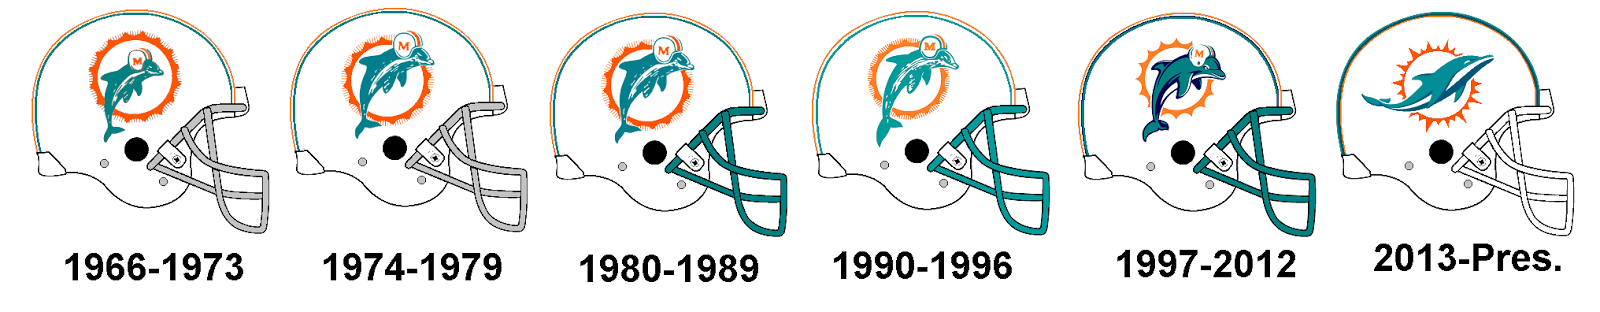 New Dolphins Logo - Should The Dolphins Go with The Classic Logo or the New Logo?